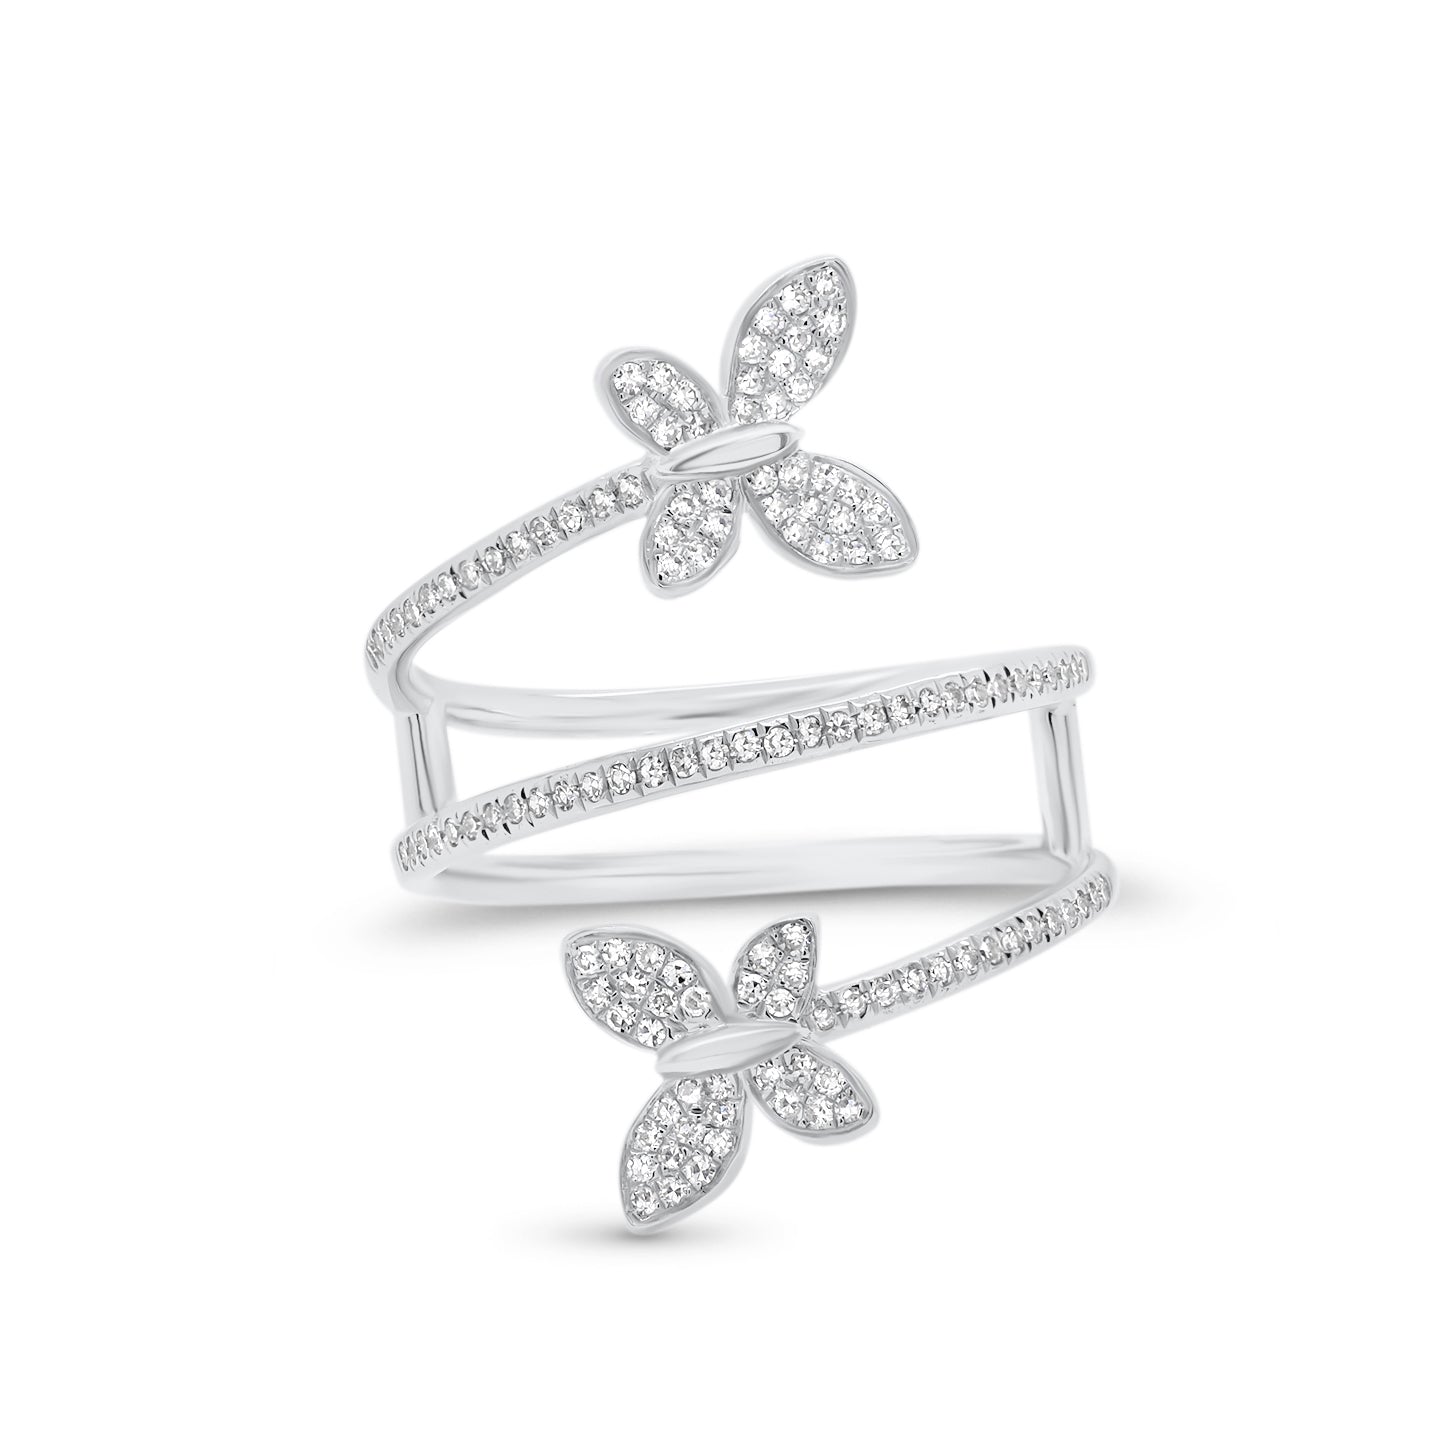 Diamond Butterfly Wrap Ring  - 14K gold weighing 3.48 grams  - 128 round diamonds totaling 0.28 carats